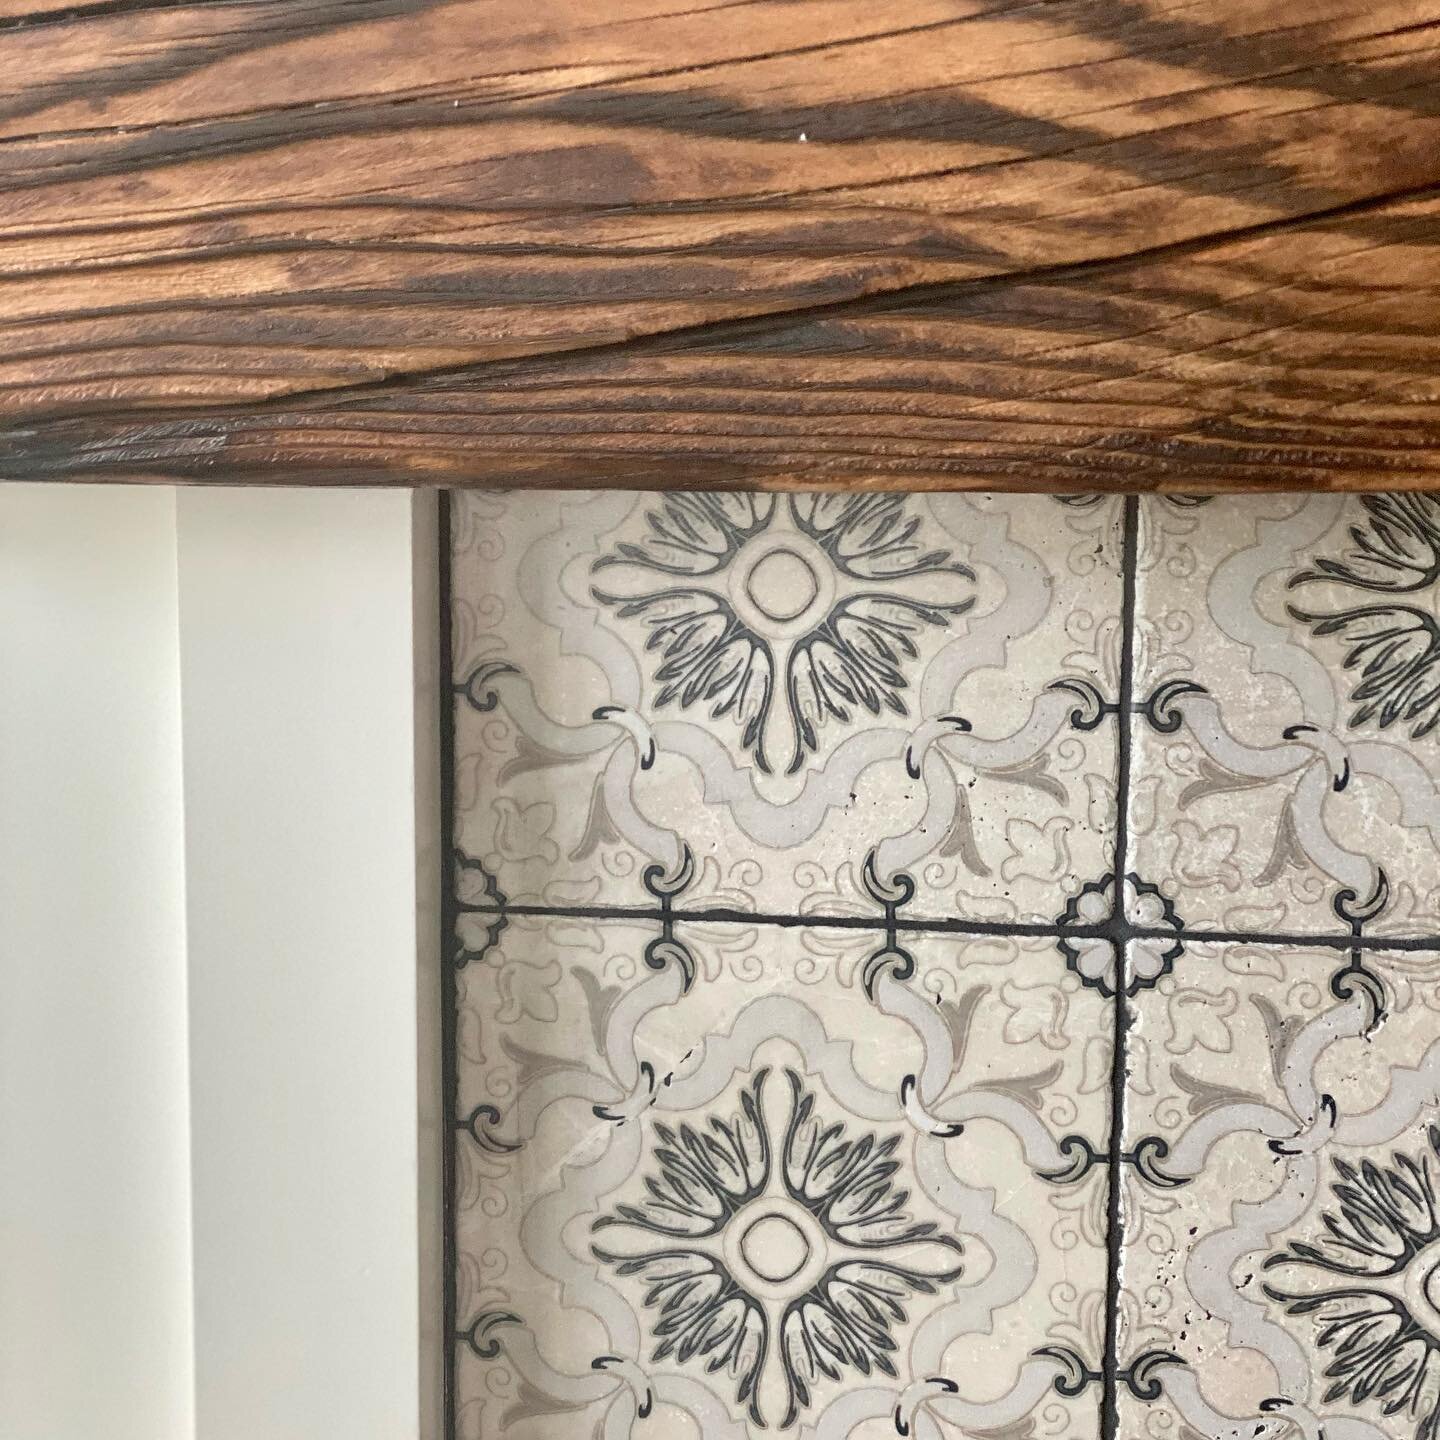 A work in progress. It&rsquo;s been a long labor of love, but the finish line is in sight.  Can&rsquo;t wait to get this project photographed, but here&rsquo;s a little glimpse with the iPhone.

Painted tile on natural stone, reclaimed wood mantle...